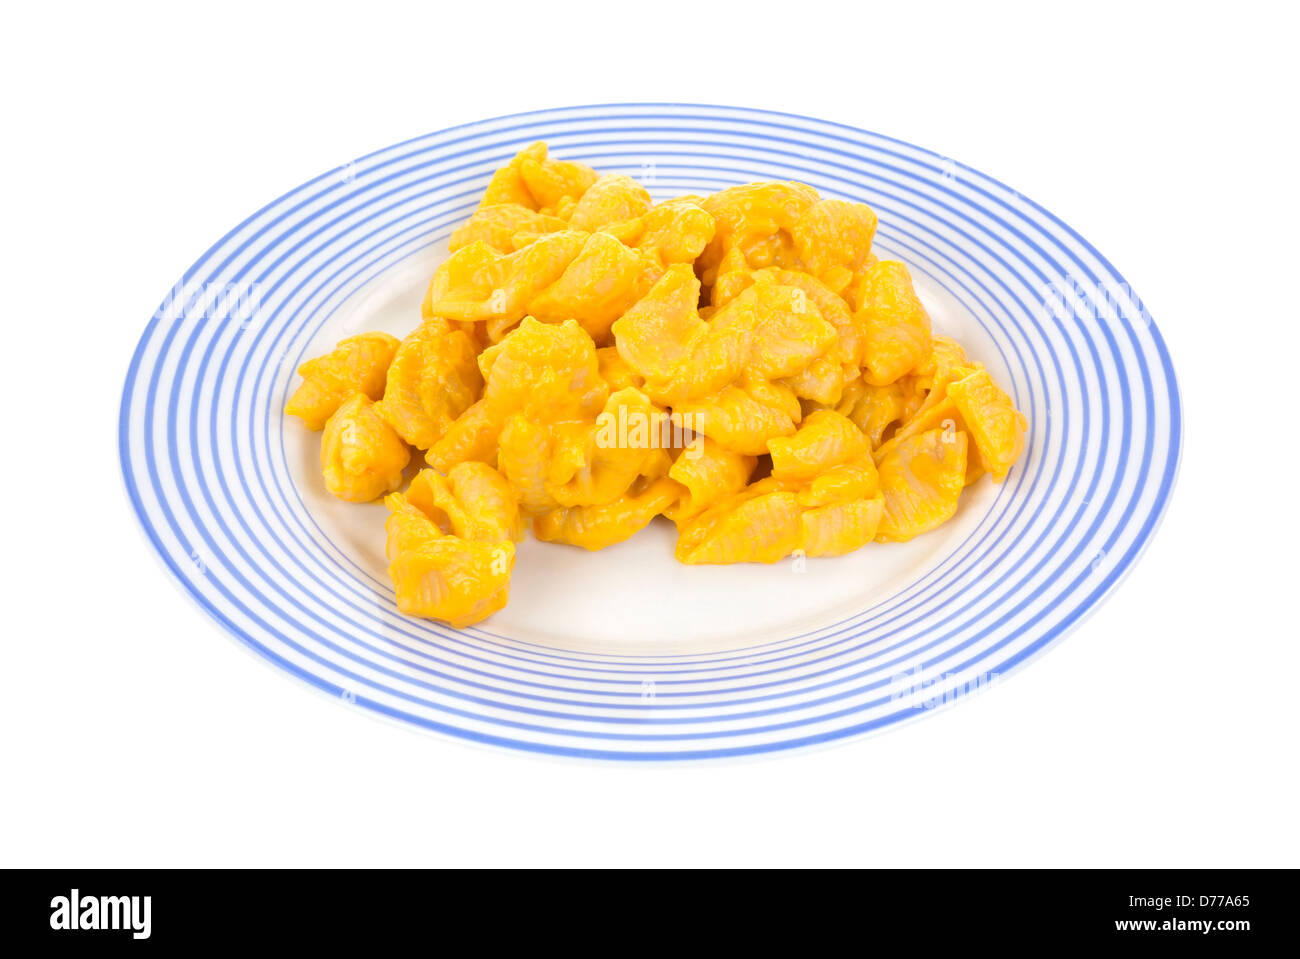 A serving of cheesy pasta shells on a blue striped plate. Stock Photo